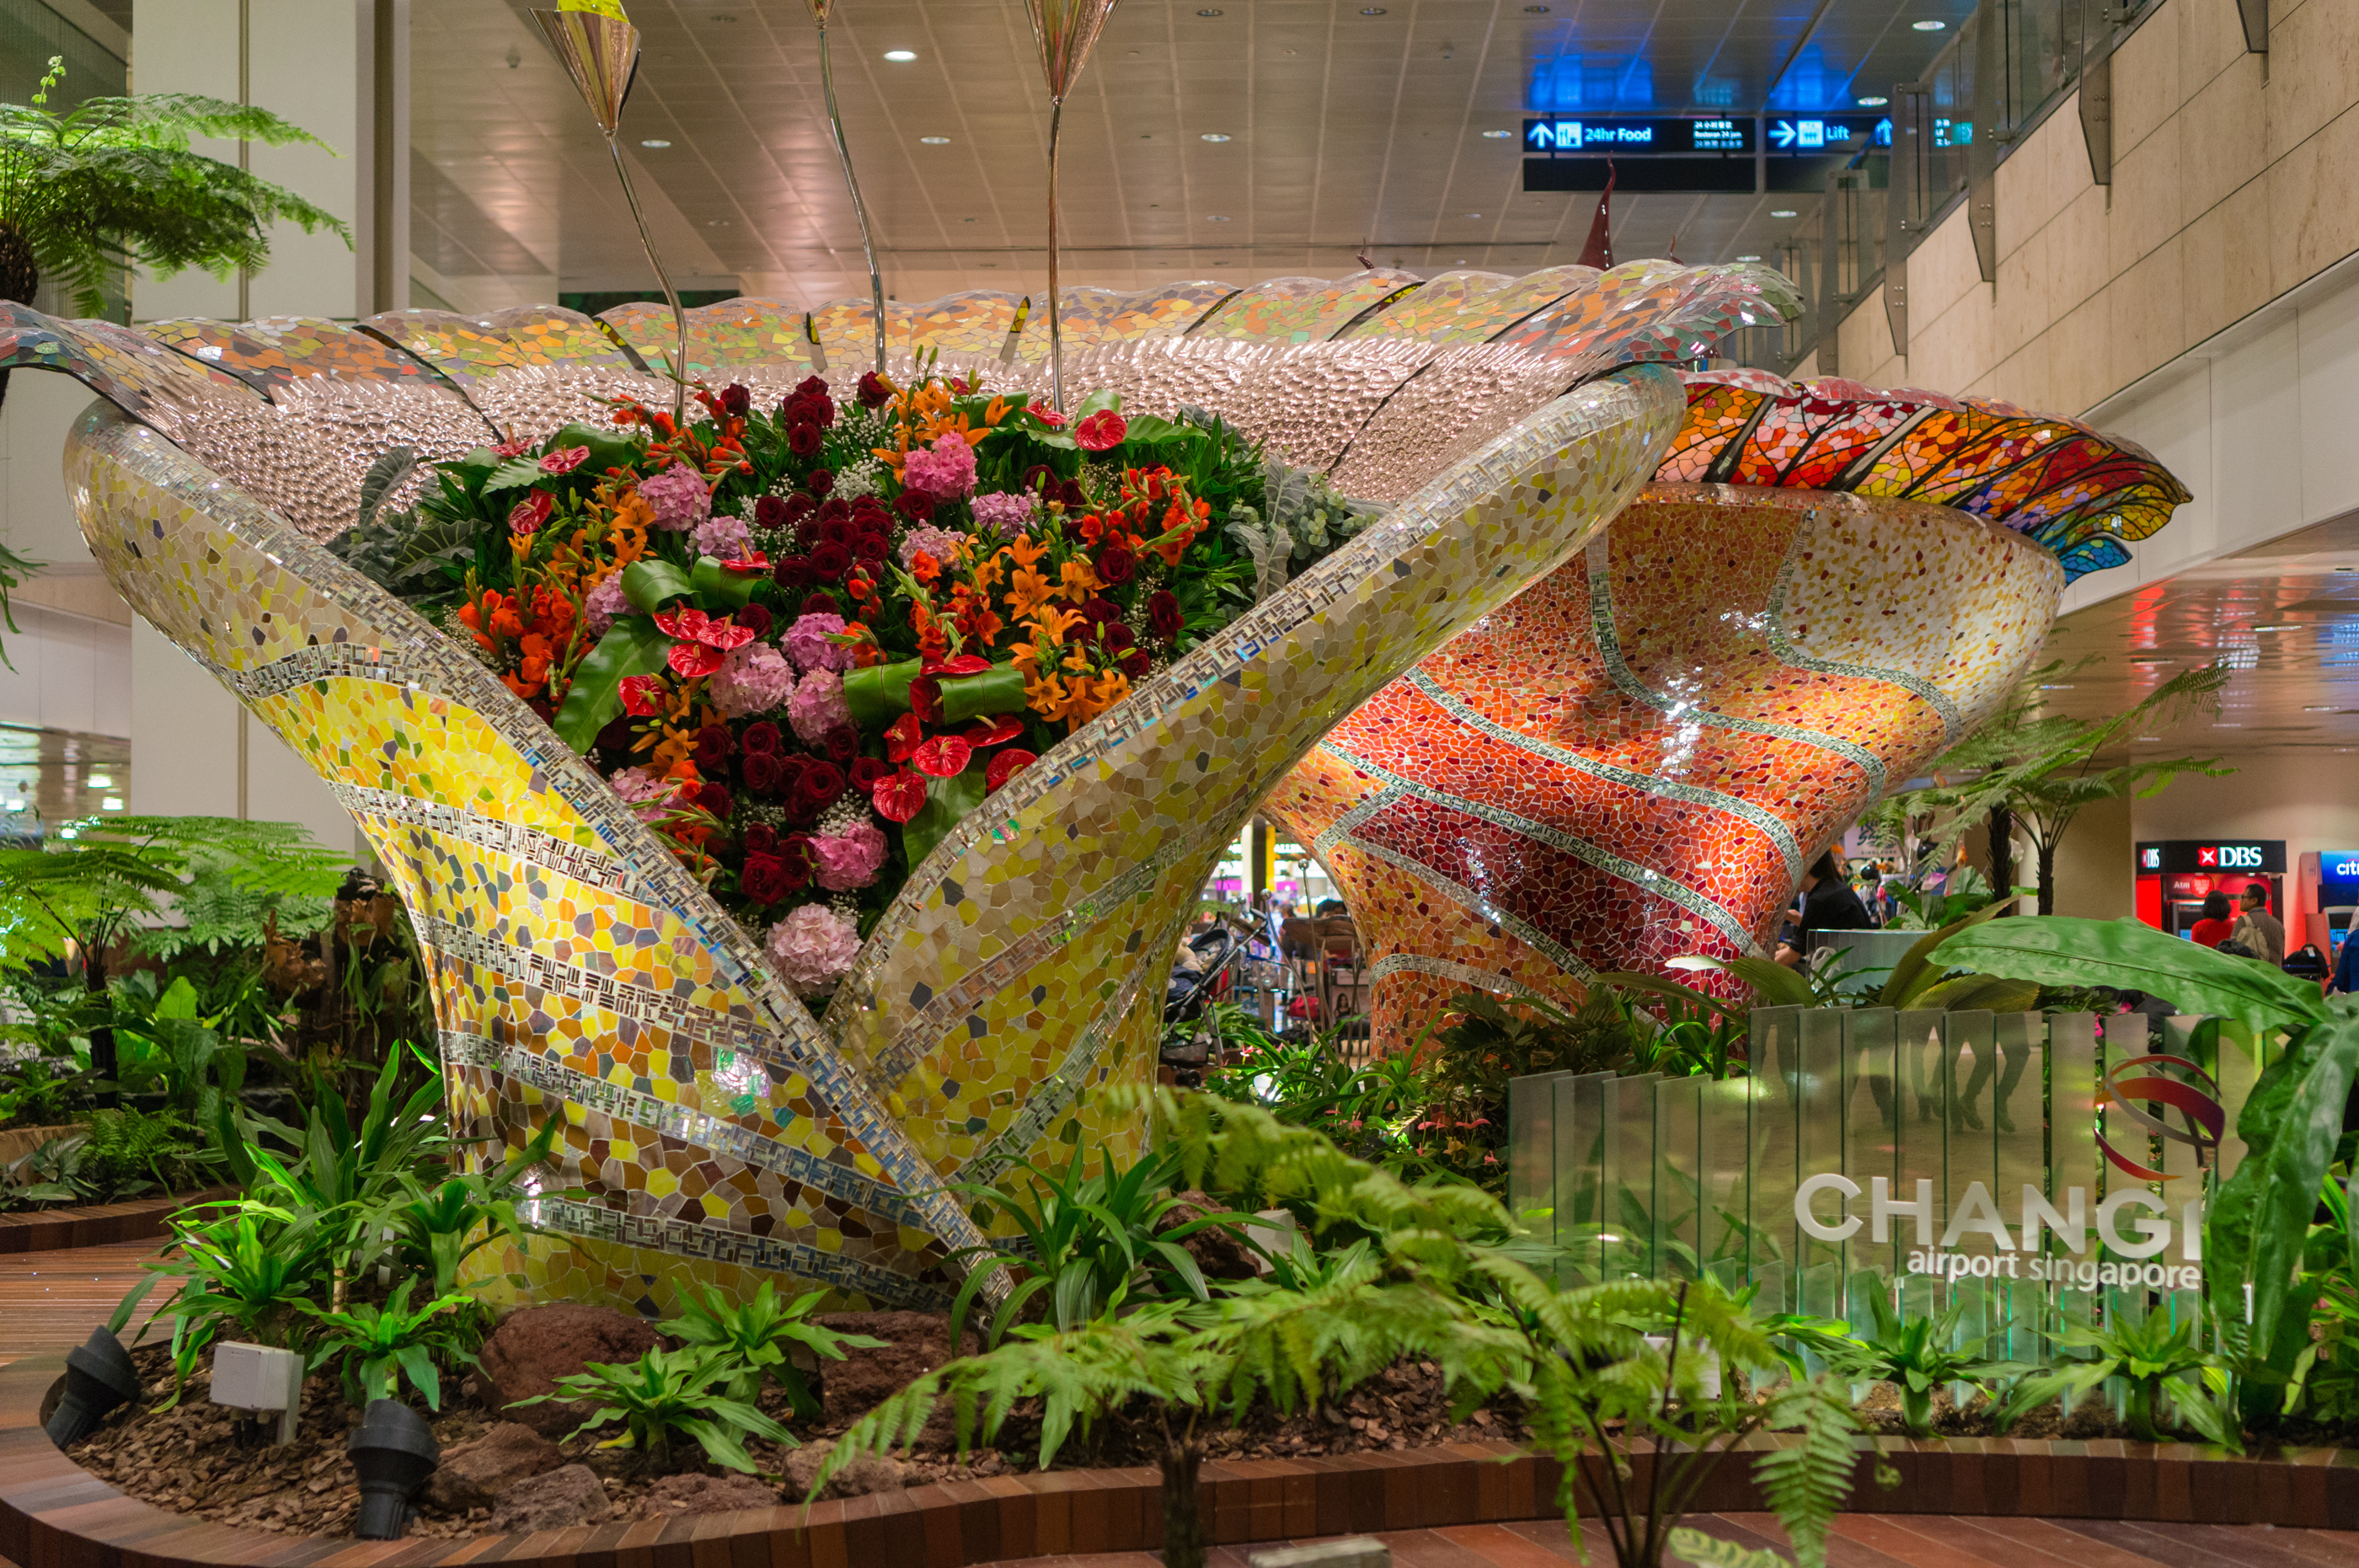 Two very large flower boxes decorated with ornate mosaics inside Changi Airport.